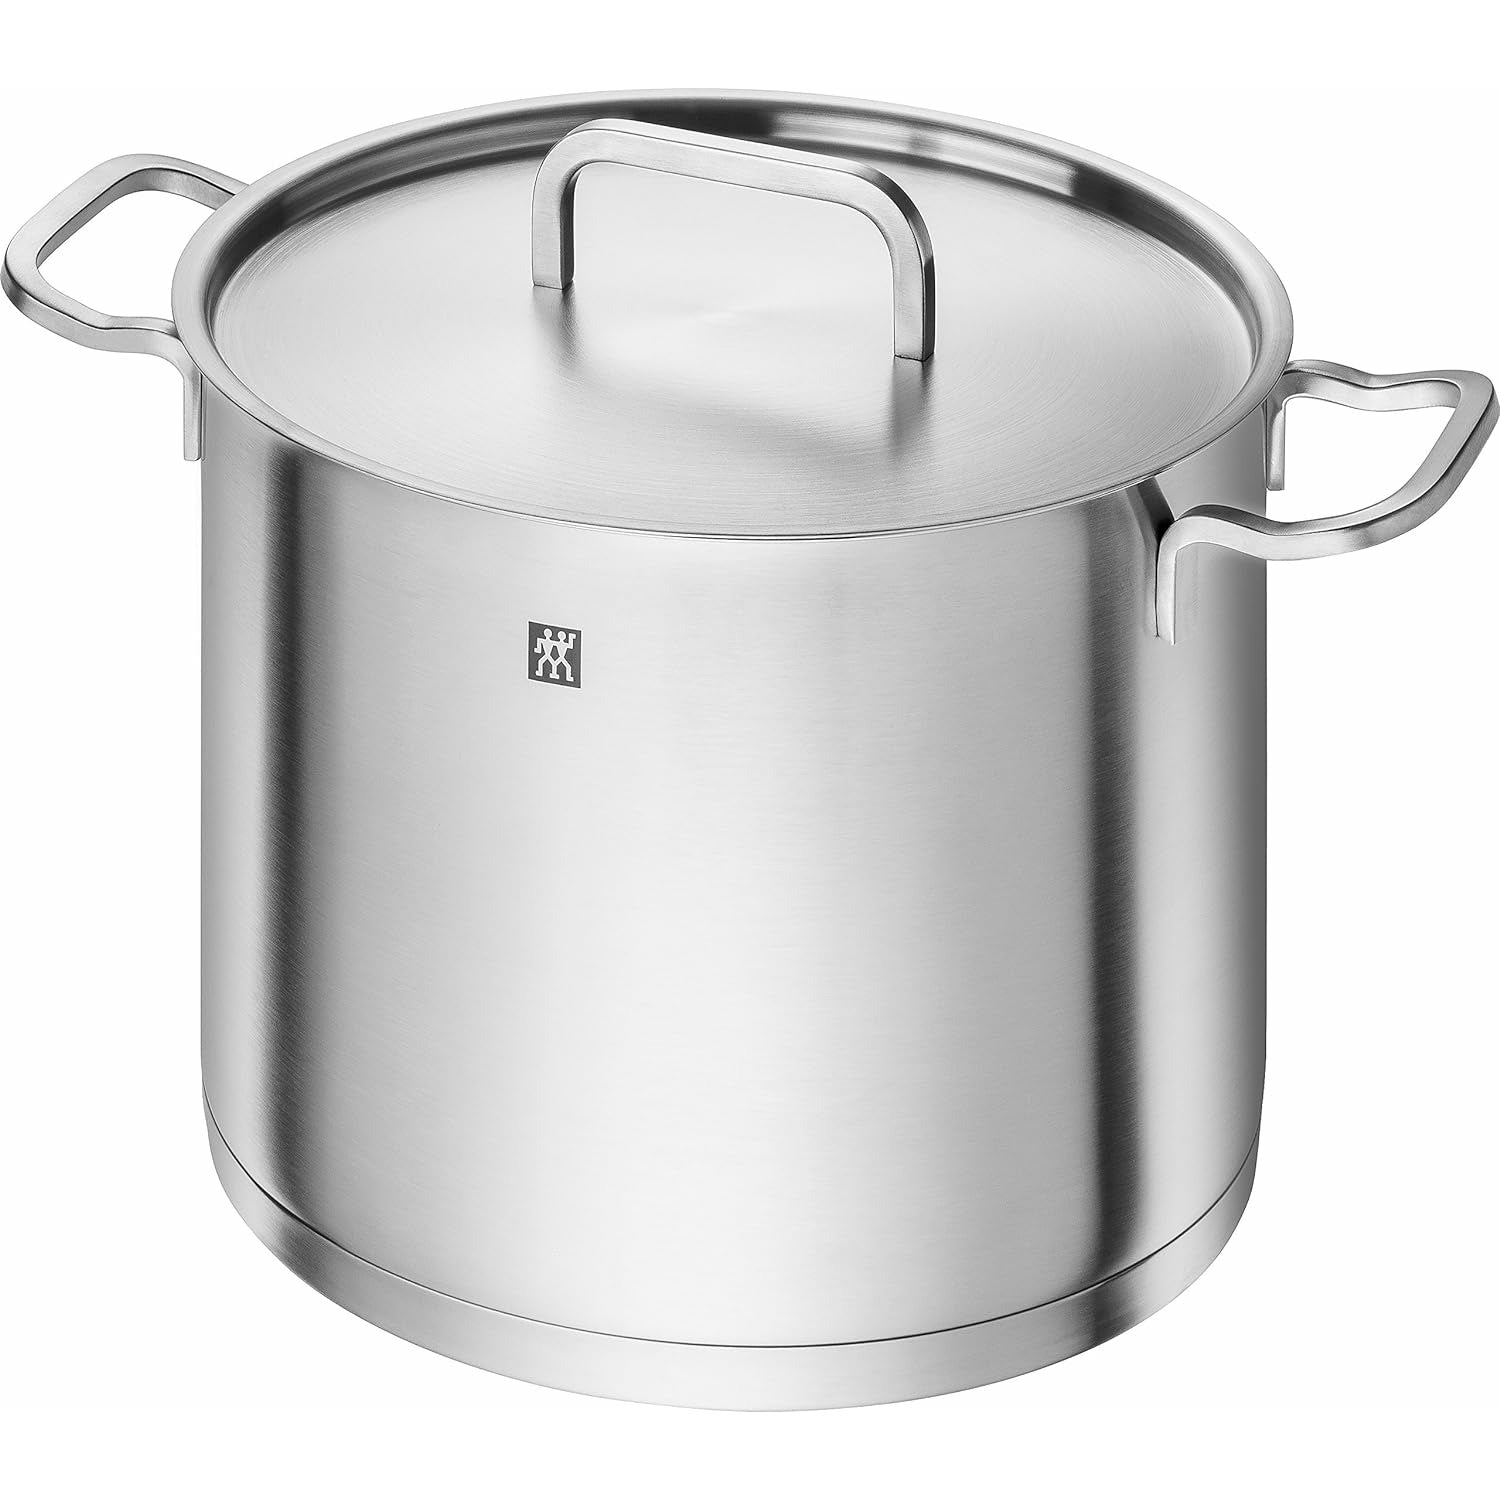 Zwilling Stainless Steel 24cm Stockpot with Lid: 66244-240